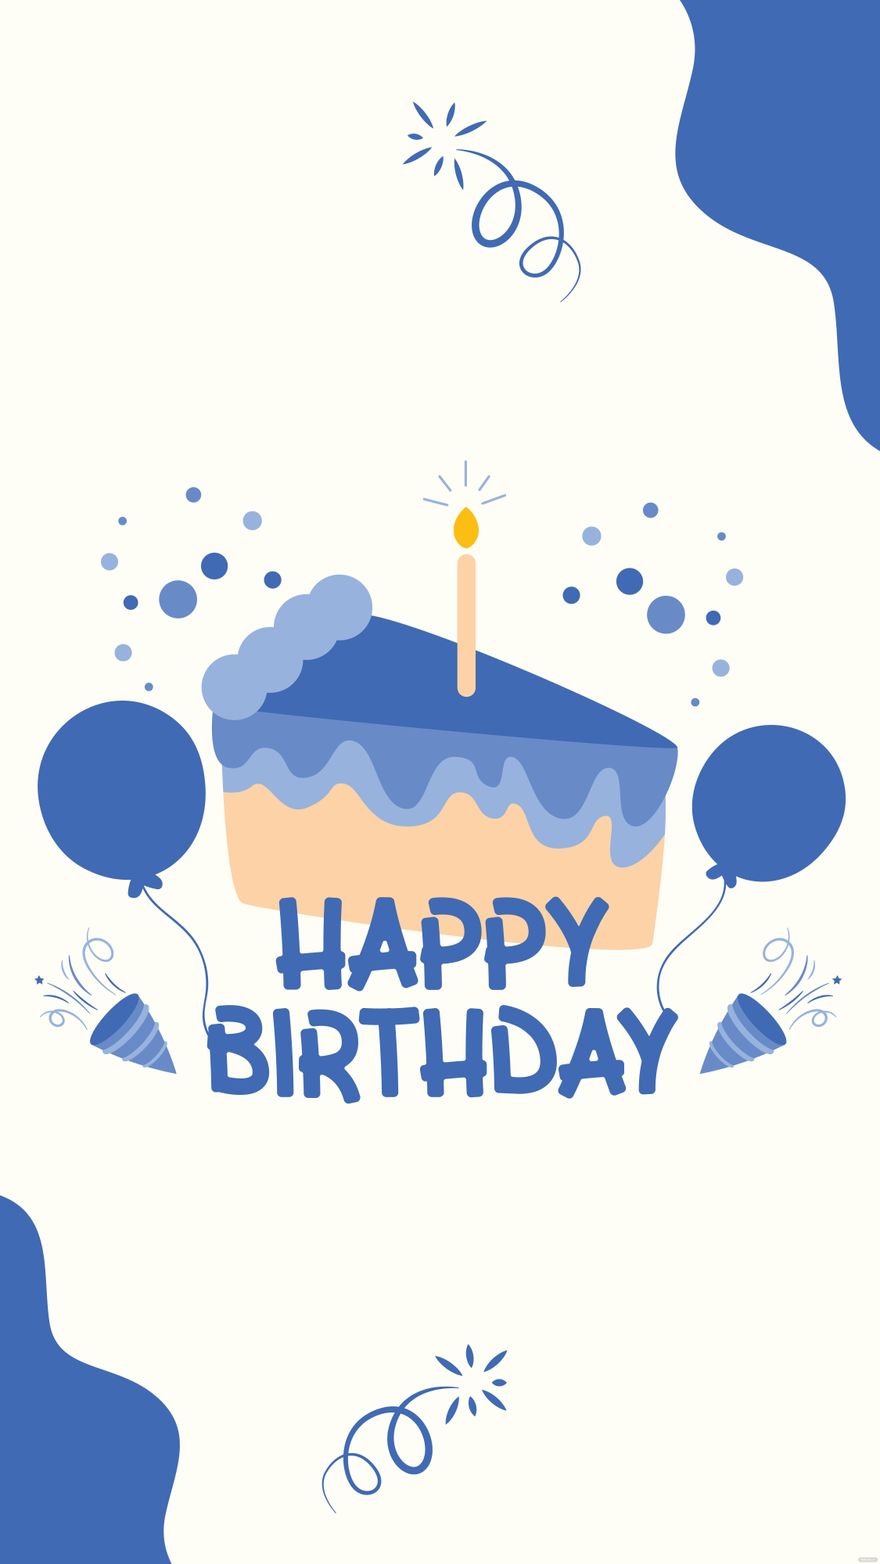 Happy Birthday Png Transparent Banner  Happy Birthday Background Hd Png  Png Download  Transparent Png Image  PNGitem